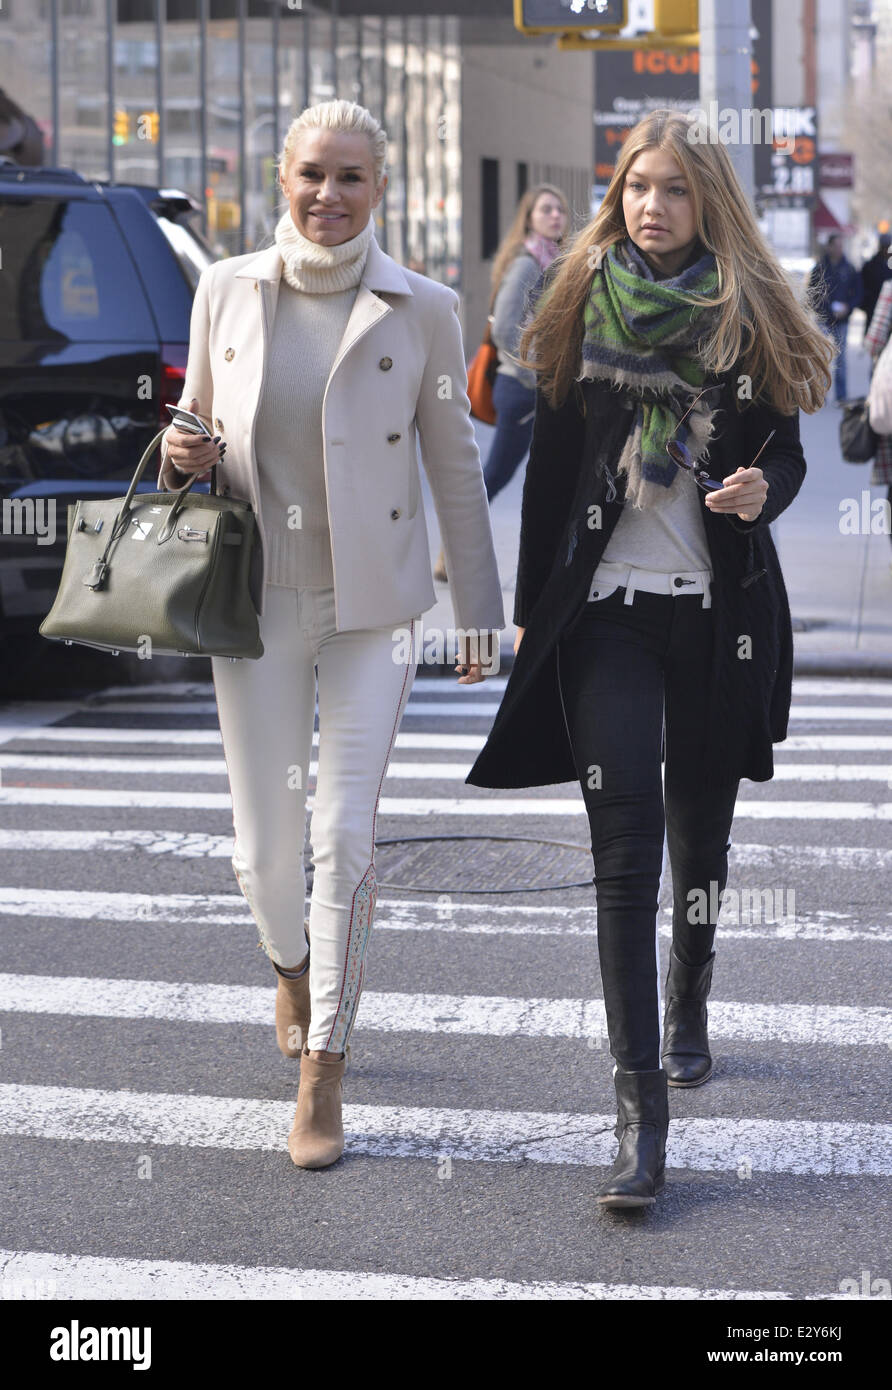 The Real Housewives of Beverly Hills' star Yolanda Foster and her daughter  Gigi Hadid seen out and about in Manhattan Featurin Stock Photo - Alamy